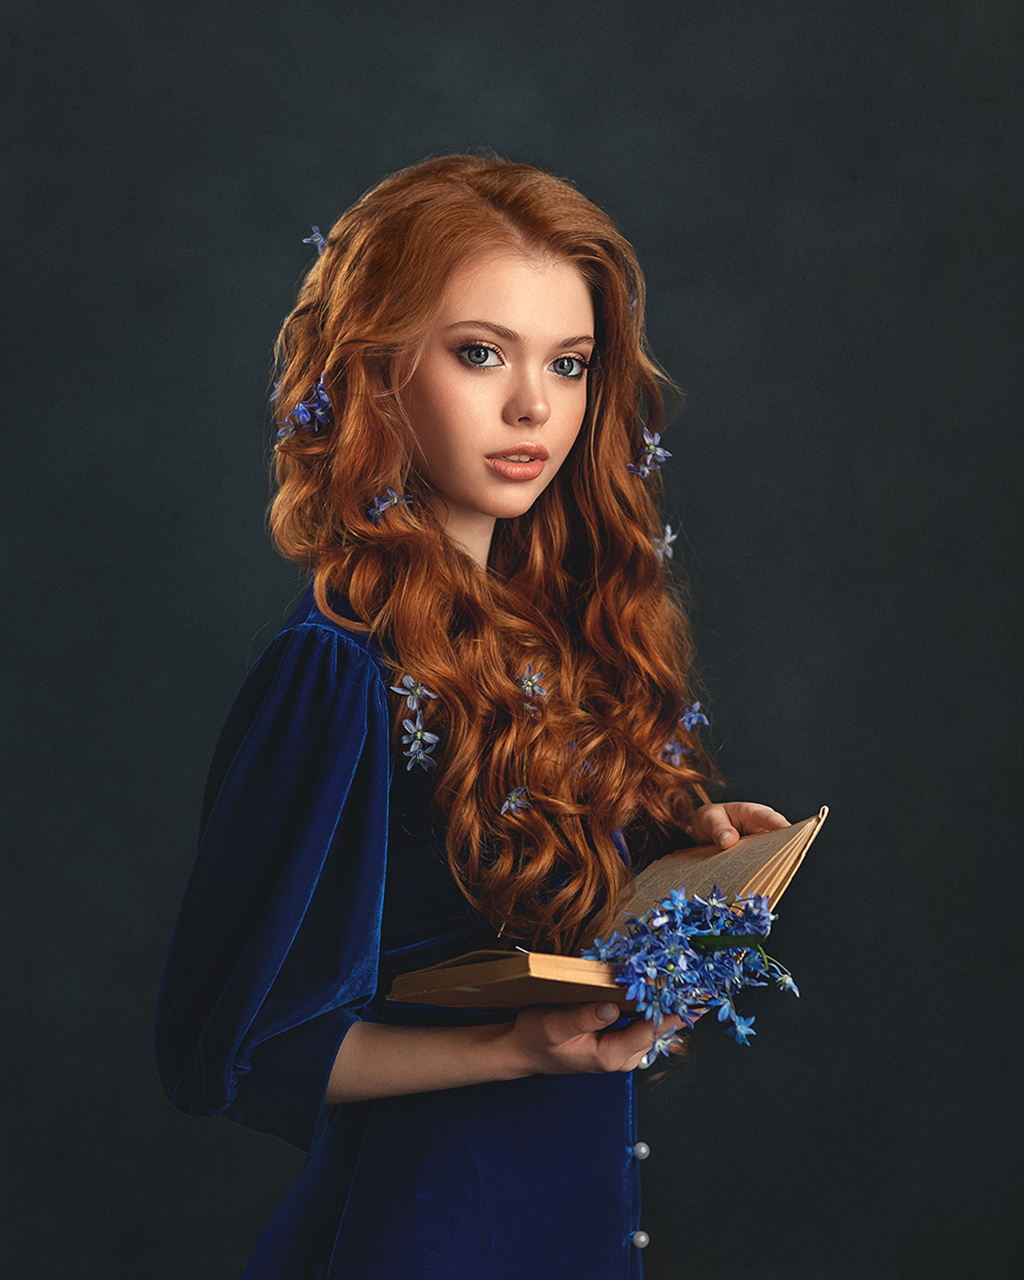 People 1024x1280 Elena Mikhailova women redhead looking away books blue flowers blue clothing flower in hair wavy hair makeup glamour portrait simple background